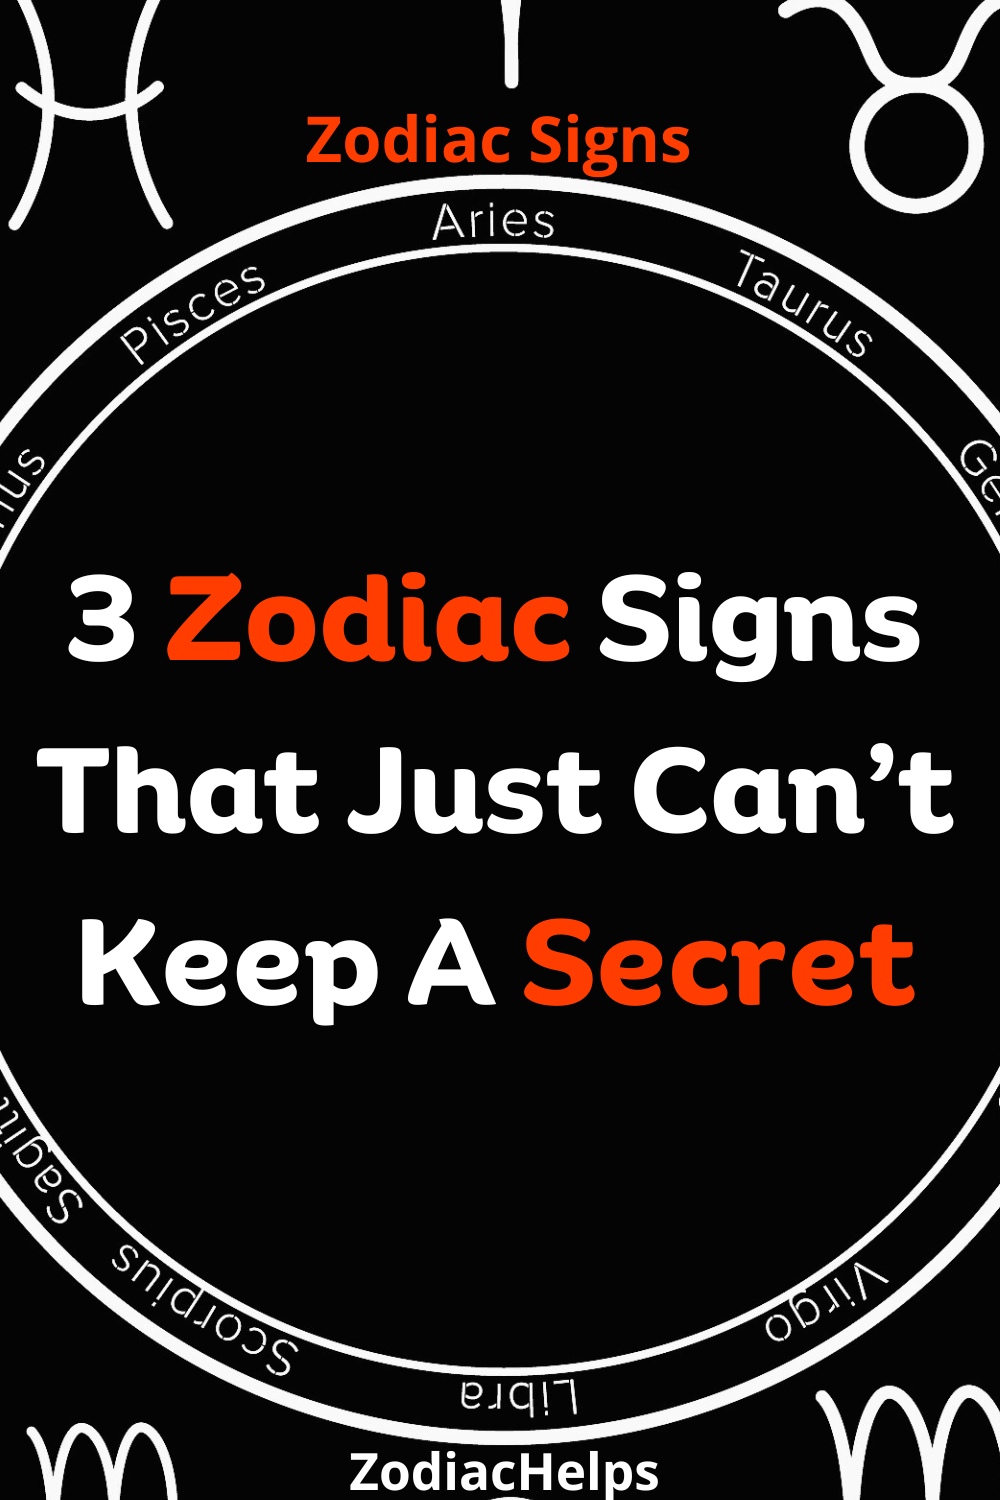 3 Zodiac Signs That Just Can’t Keep A Secret